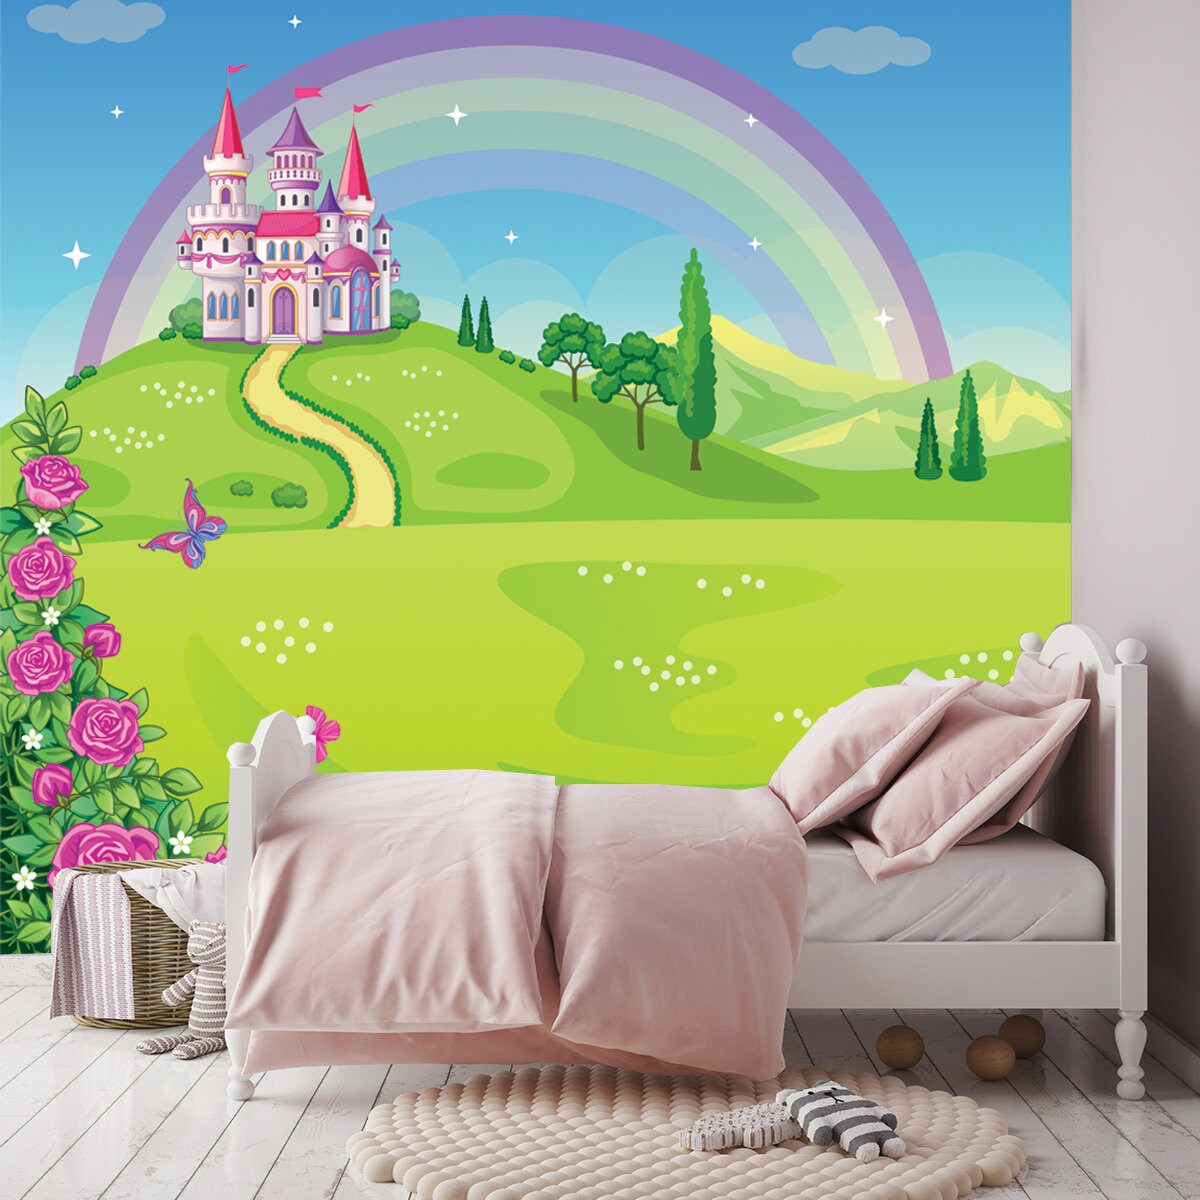 Fairytale Background with Flower Meadow. Princess's Castle and Rainbow. Fabulous Landscape with Butterflies Wallpaper Girls Bedroom Mural